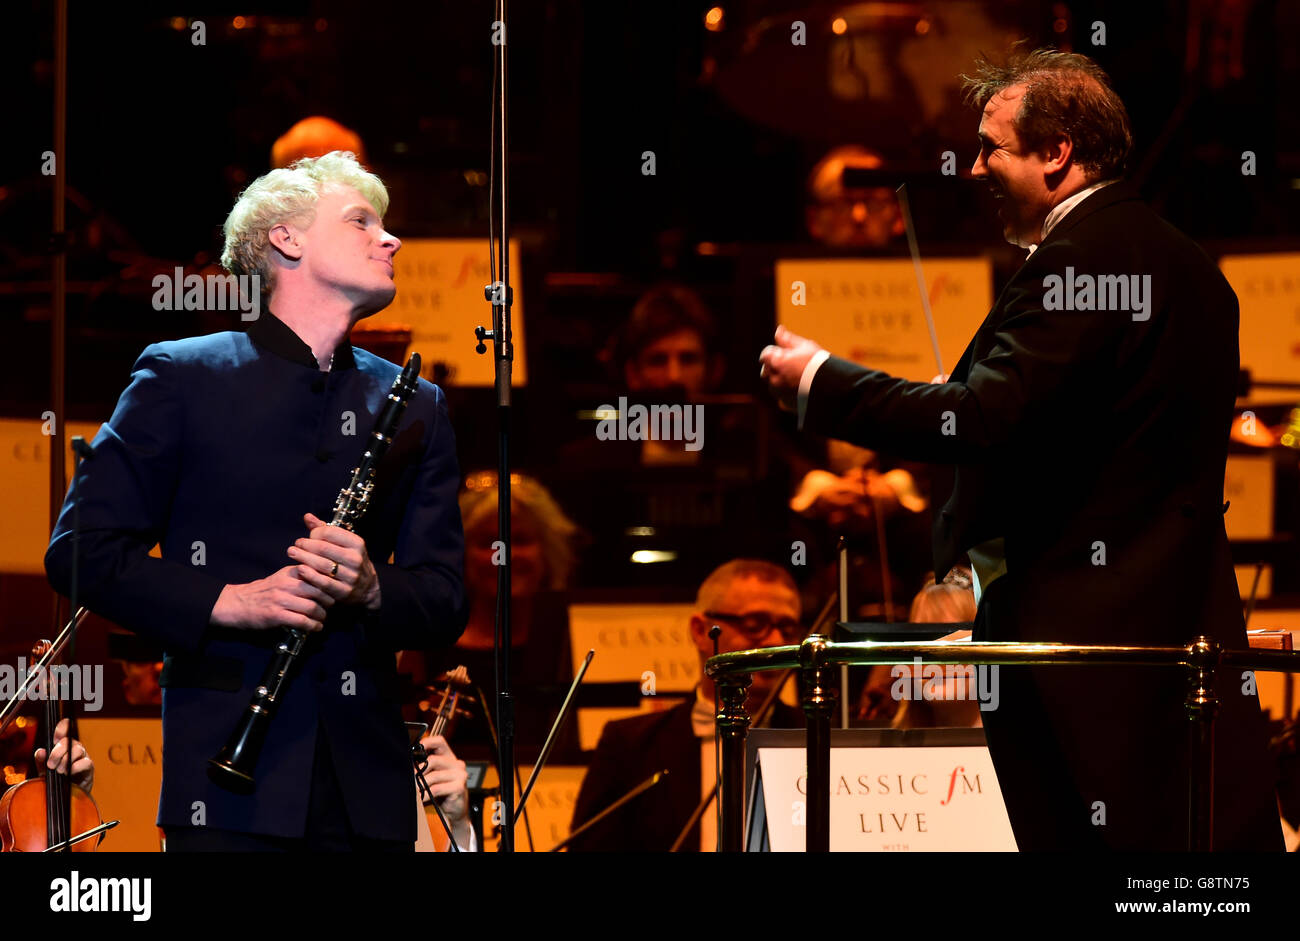 Clarinettist Martin Frost (left) is greeted by conductor Jaime Martin during Classic FM Live at the Royal Albert Hall, London. Stock Photo